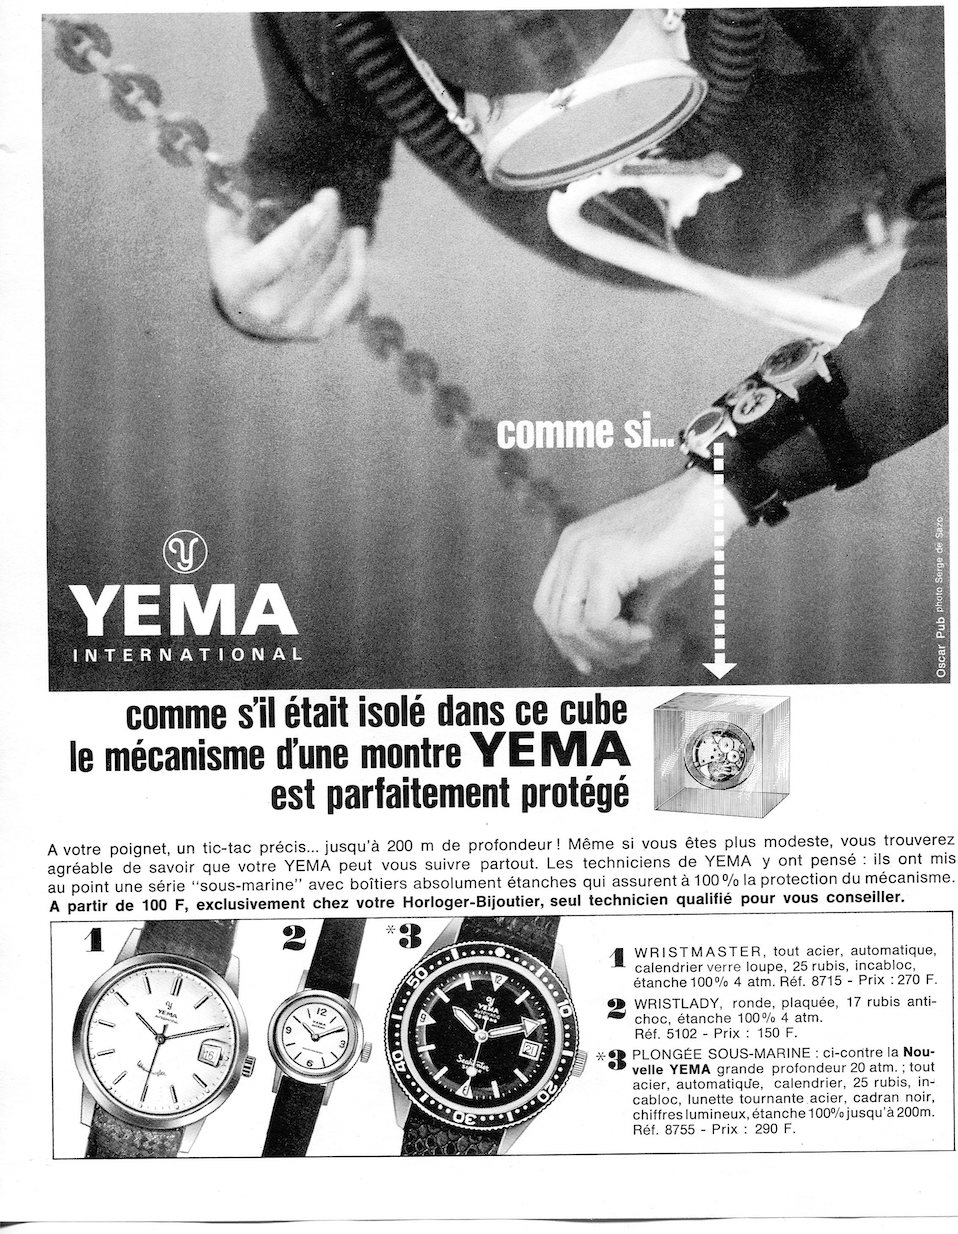 YEMA Wrismaster advertising. As if it was isolated in this cube, the Yema mechanism is perfecly protected